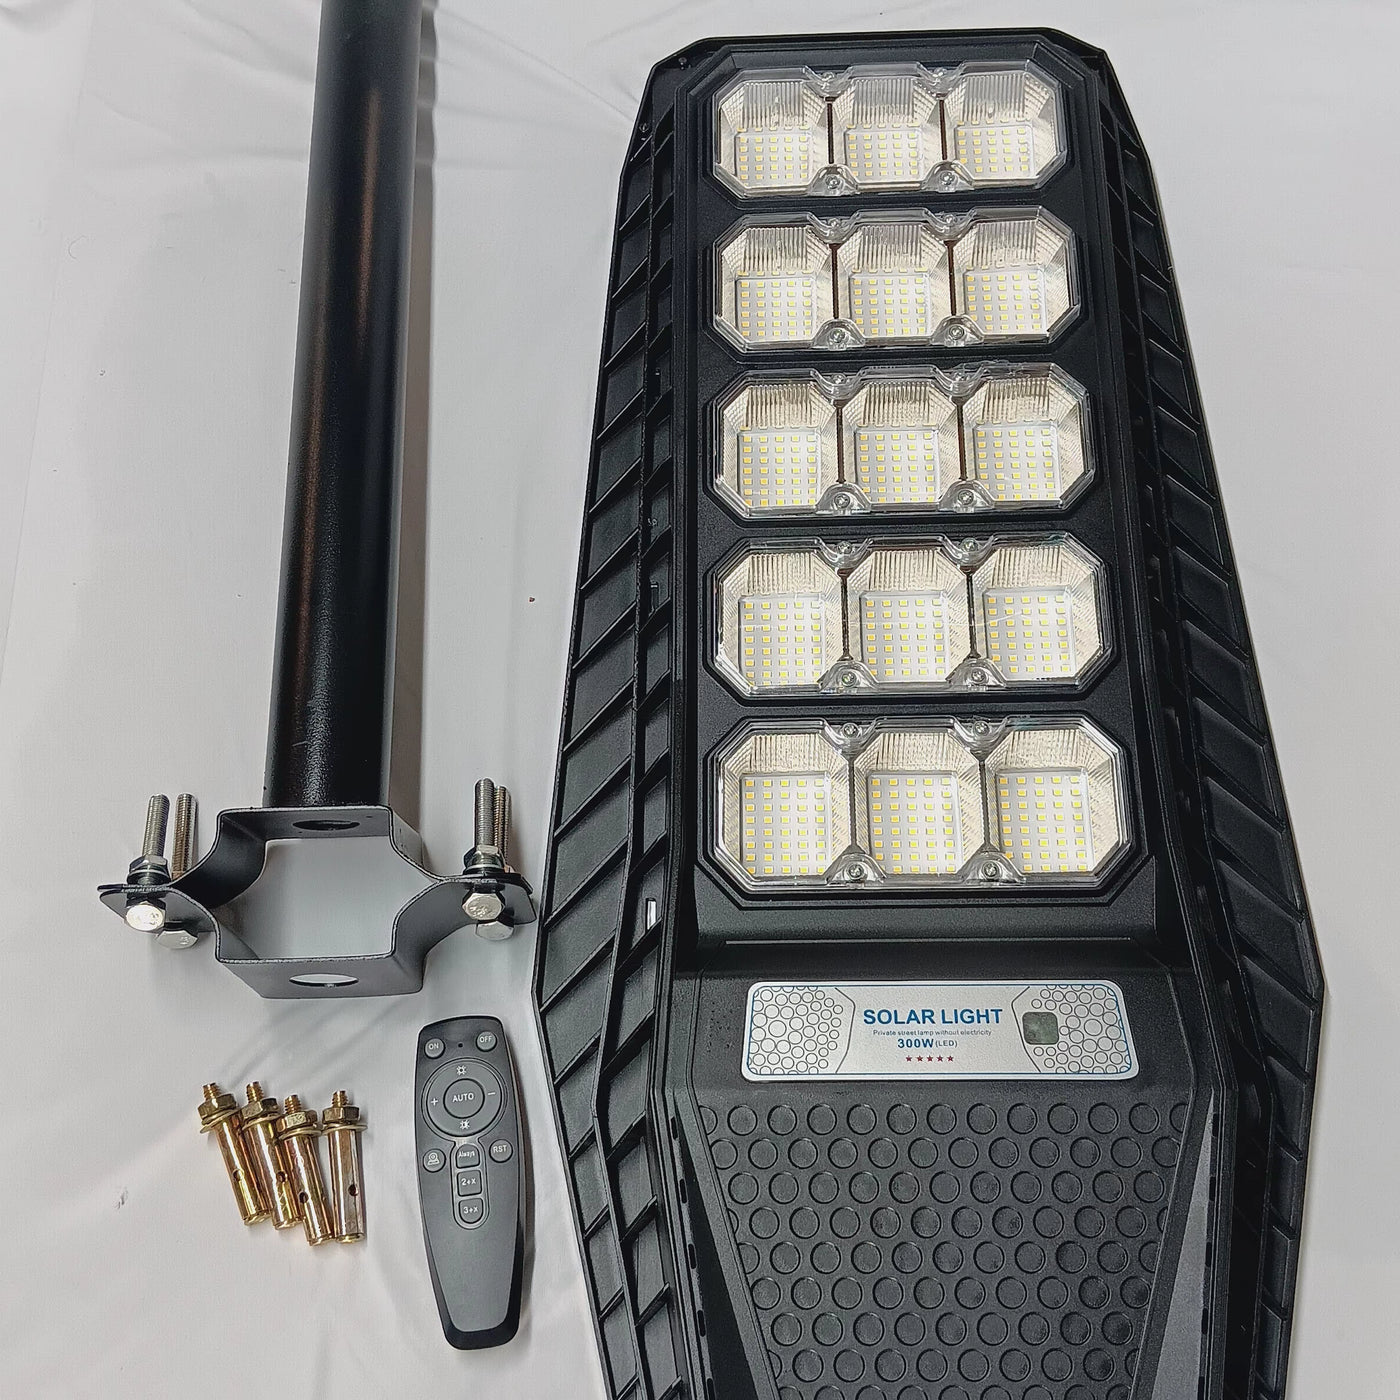 300 Watt Solar Street Light with remote control, lag bolts and mounting pole